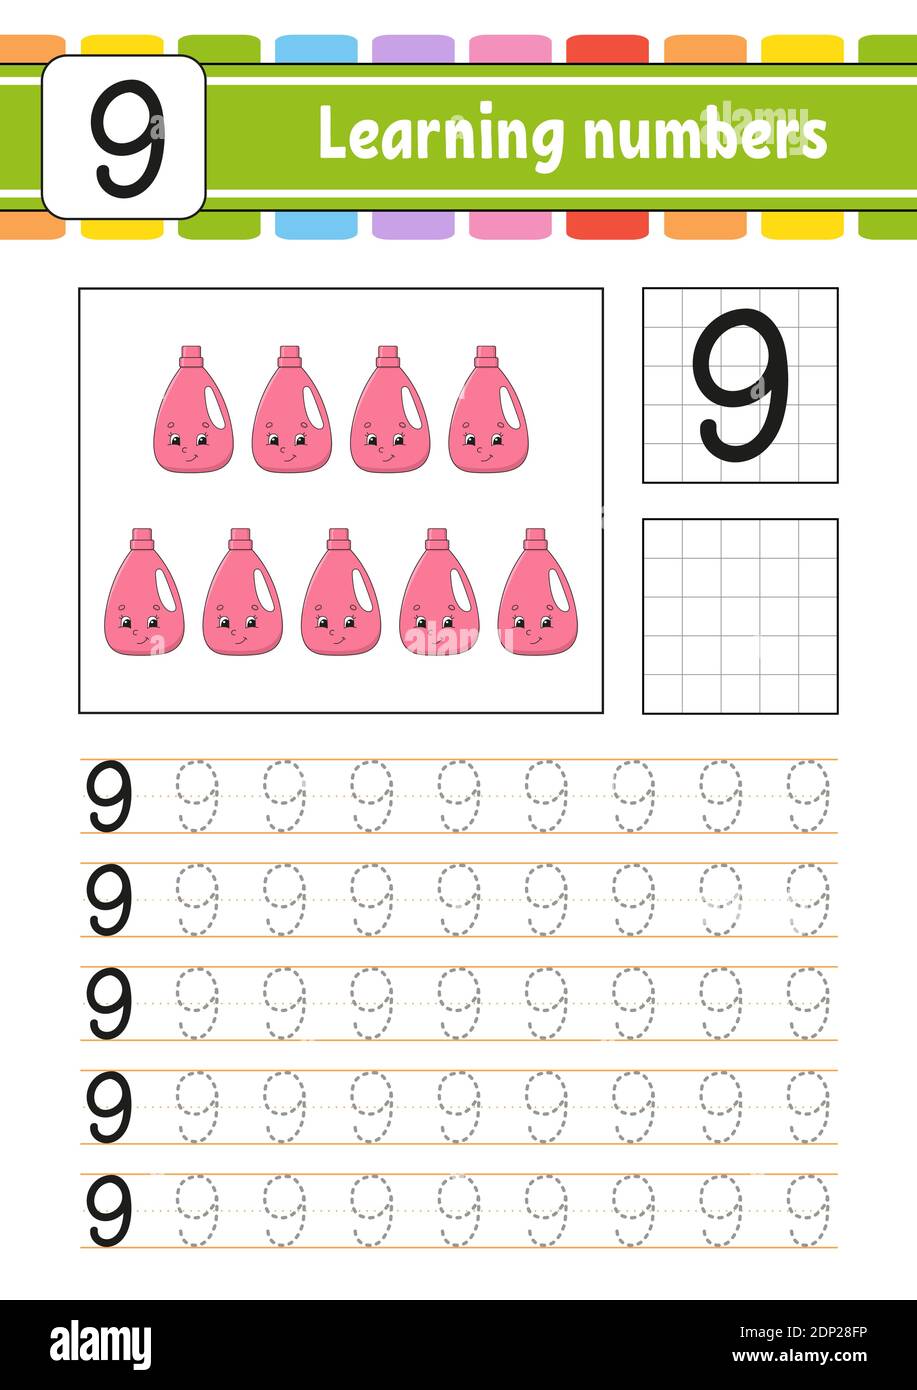 Learning numbers for kids. Handwriting practice. Education developing worksheet. Activity page. Game for toddlers and preschoolers. Isolated vector il Stock Vector